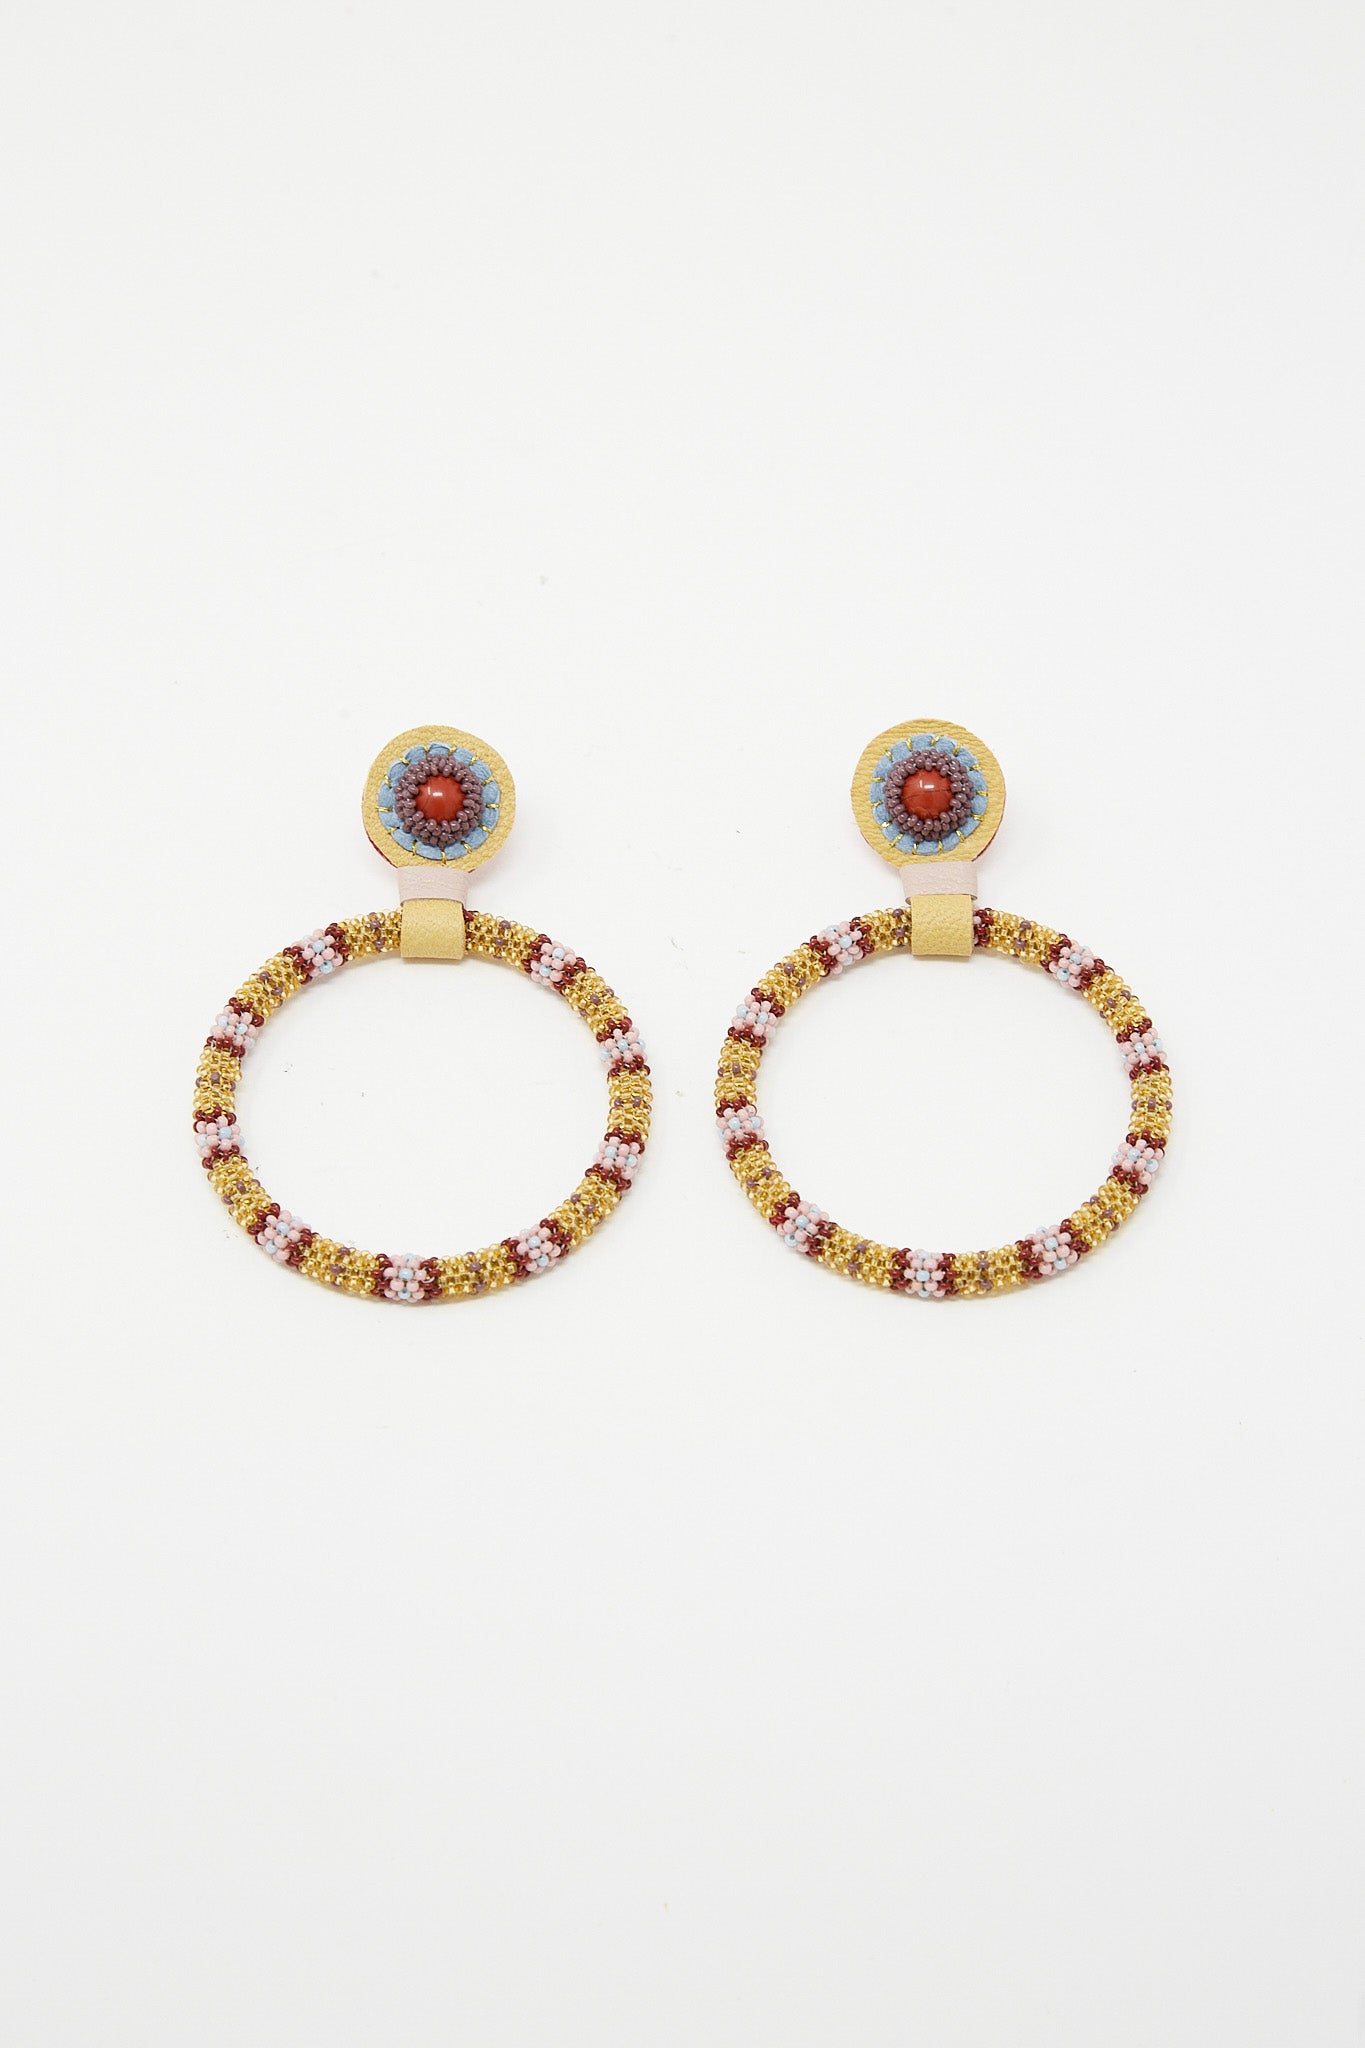 Hand-stitched Robin Mollicone Large Beaded Hoops in Red Jasper Stones.